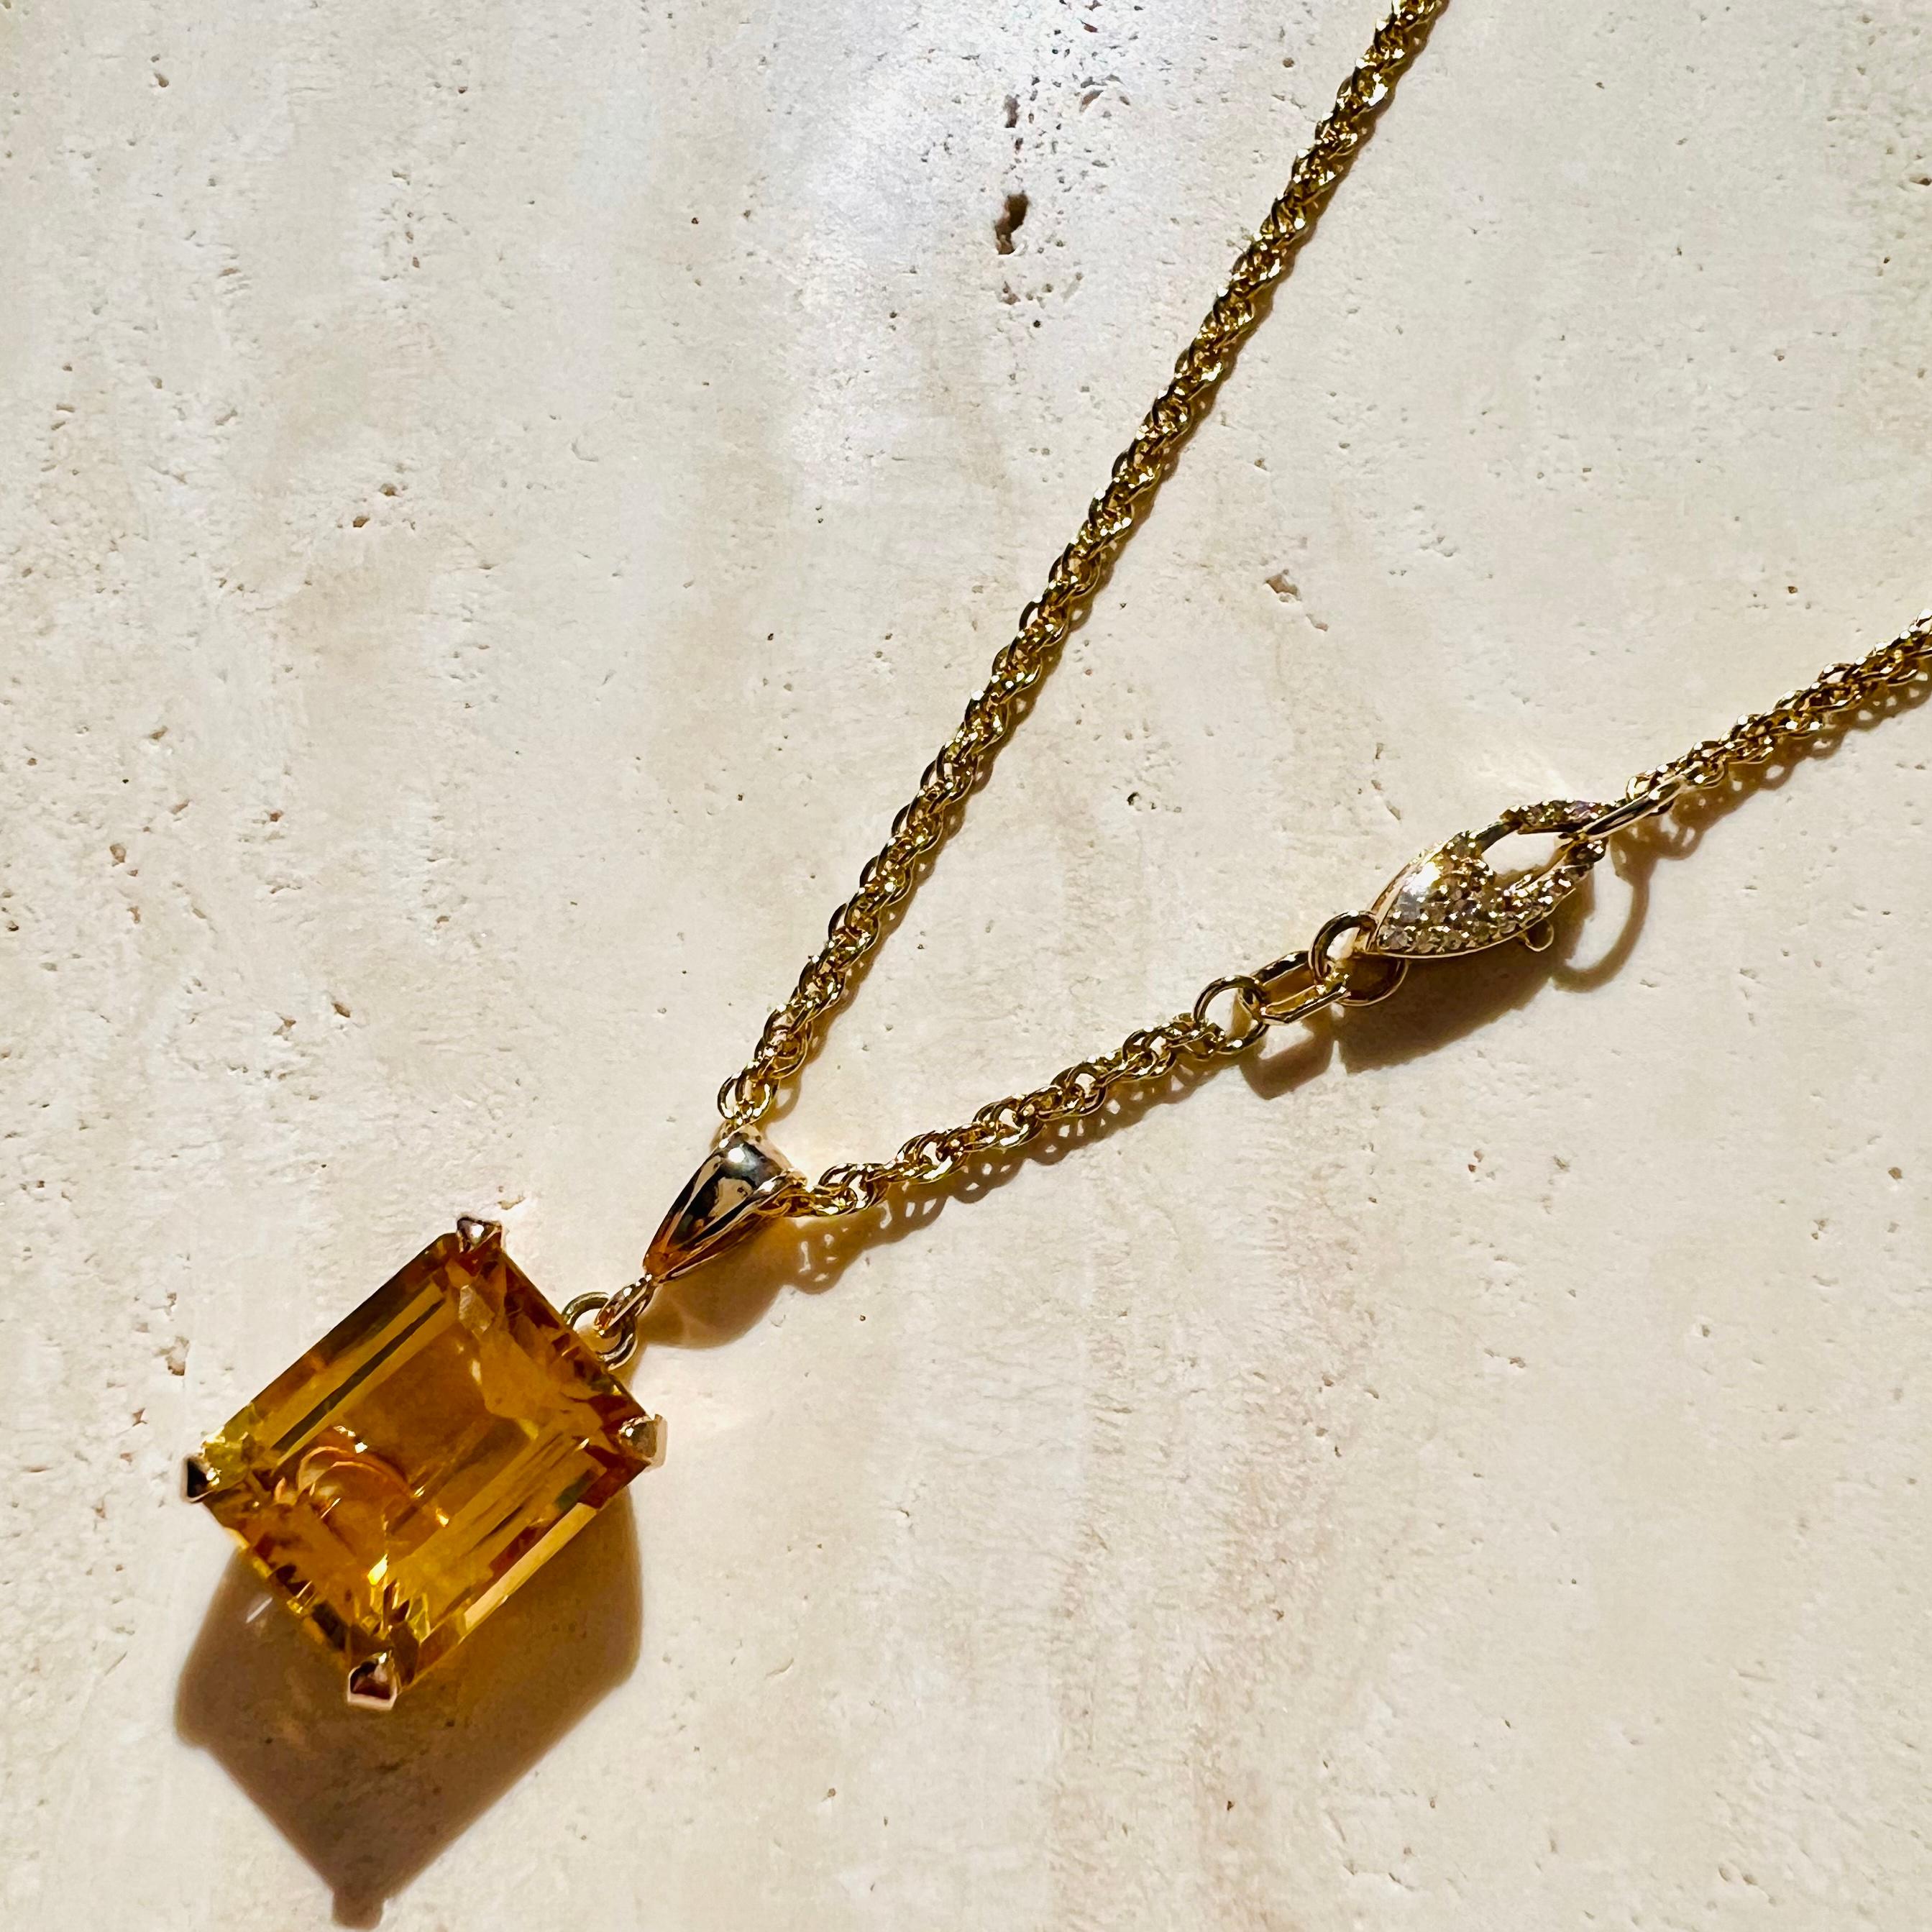 A 14k gold citrine pendant paired with a custom pavé double-sided diamond clasp and solid 14k gold overlapping chain. Can be styled with the diamond clasp in the front or back. No need to constantly readjust the clasp of a plain gold chain out of